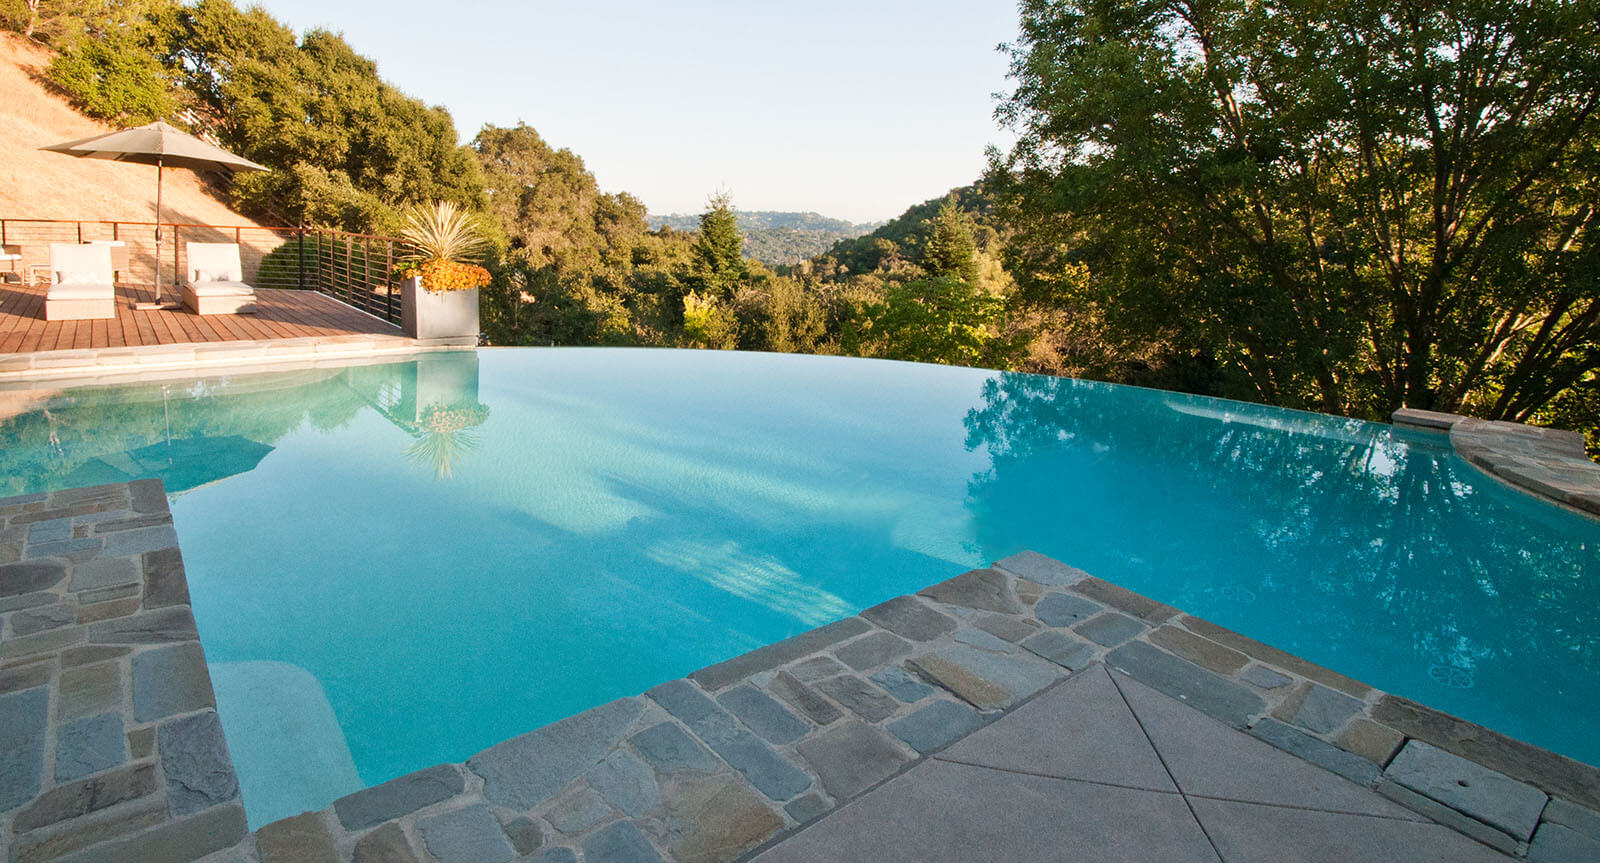 Edge-less pool looking over the valley, with stone patio flooring on the other side